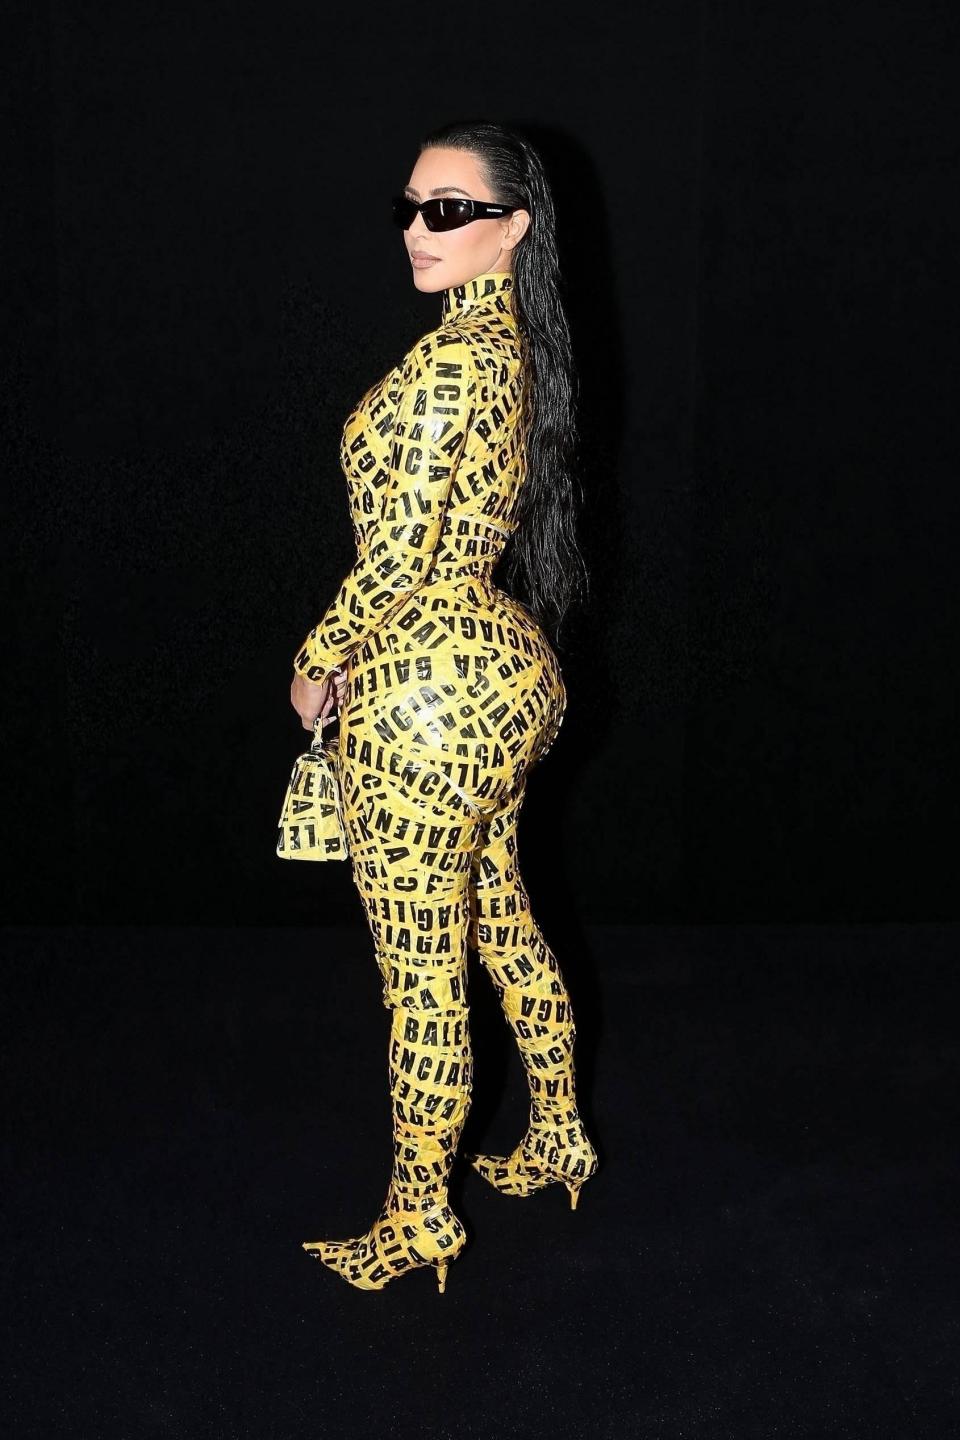 Kim stands while posing in her caution tape dress